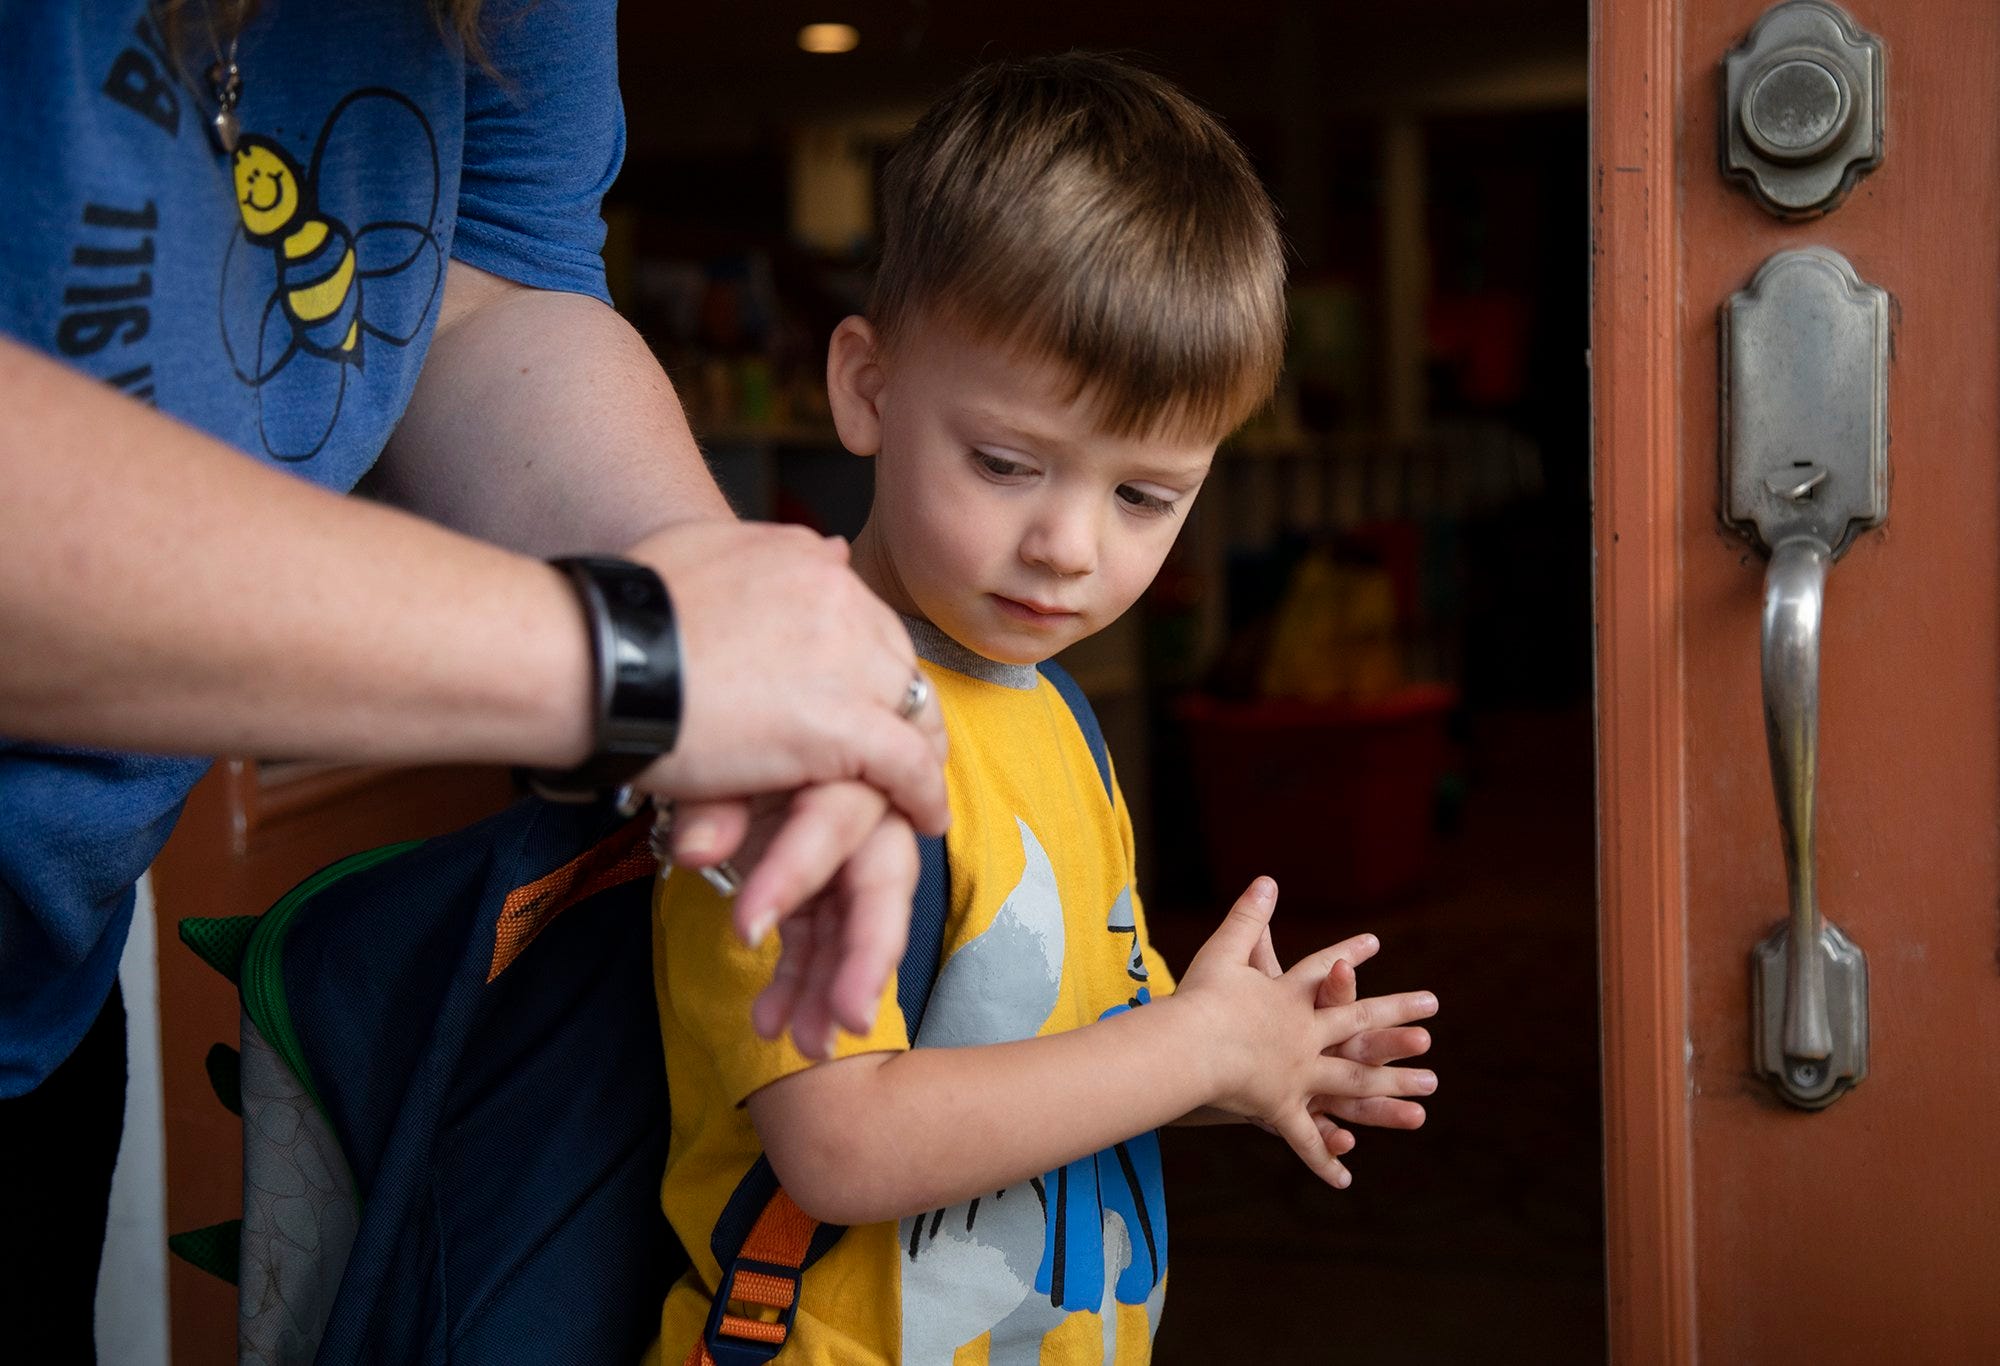 Sarah Smith, the owner of Busy Bee Academy,  reminds Jefferson Orozco, 3, how to properly use hand sanitizer before he enters the daycare on April 9, 2020, in Bastrop, Texas. Children with a temperature of 100.4 won't be accepted at drop off. The business had about 140 children enrolled in their daycare program before the coronavirus. It now has about 40 to 50 children each day for essential workers only. Smith checks each child's temperature and disinfects the children's shoes and has them use hand sanitizer before entering the building. Smith said the state notified her by e mail with regulation changes on March 15.